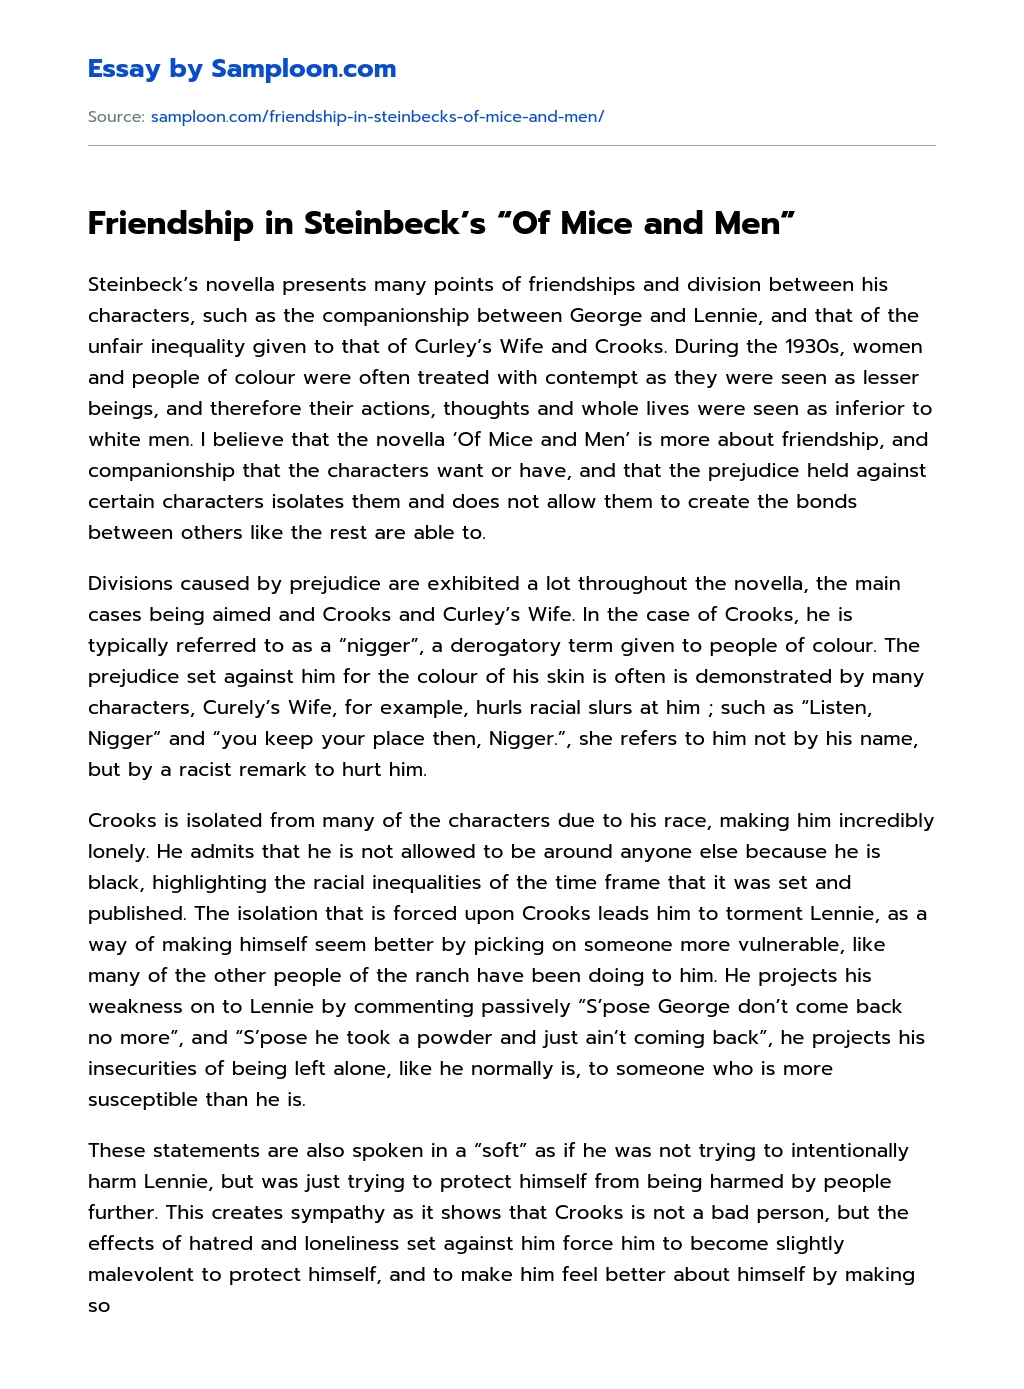 Friendship in Steinbeck’s “Of Mice and Men” essay